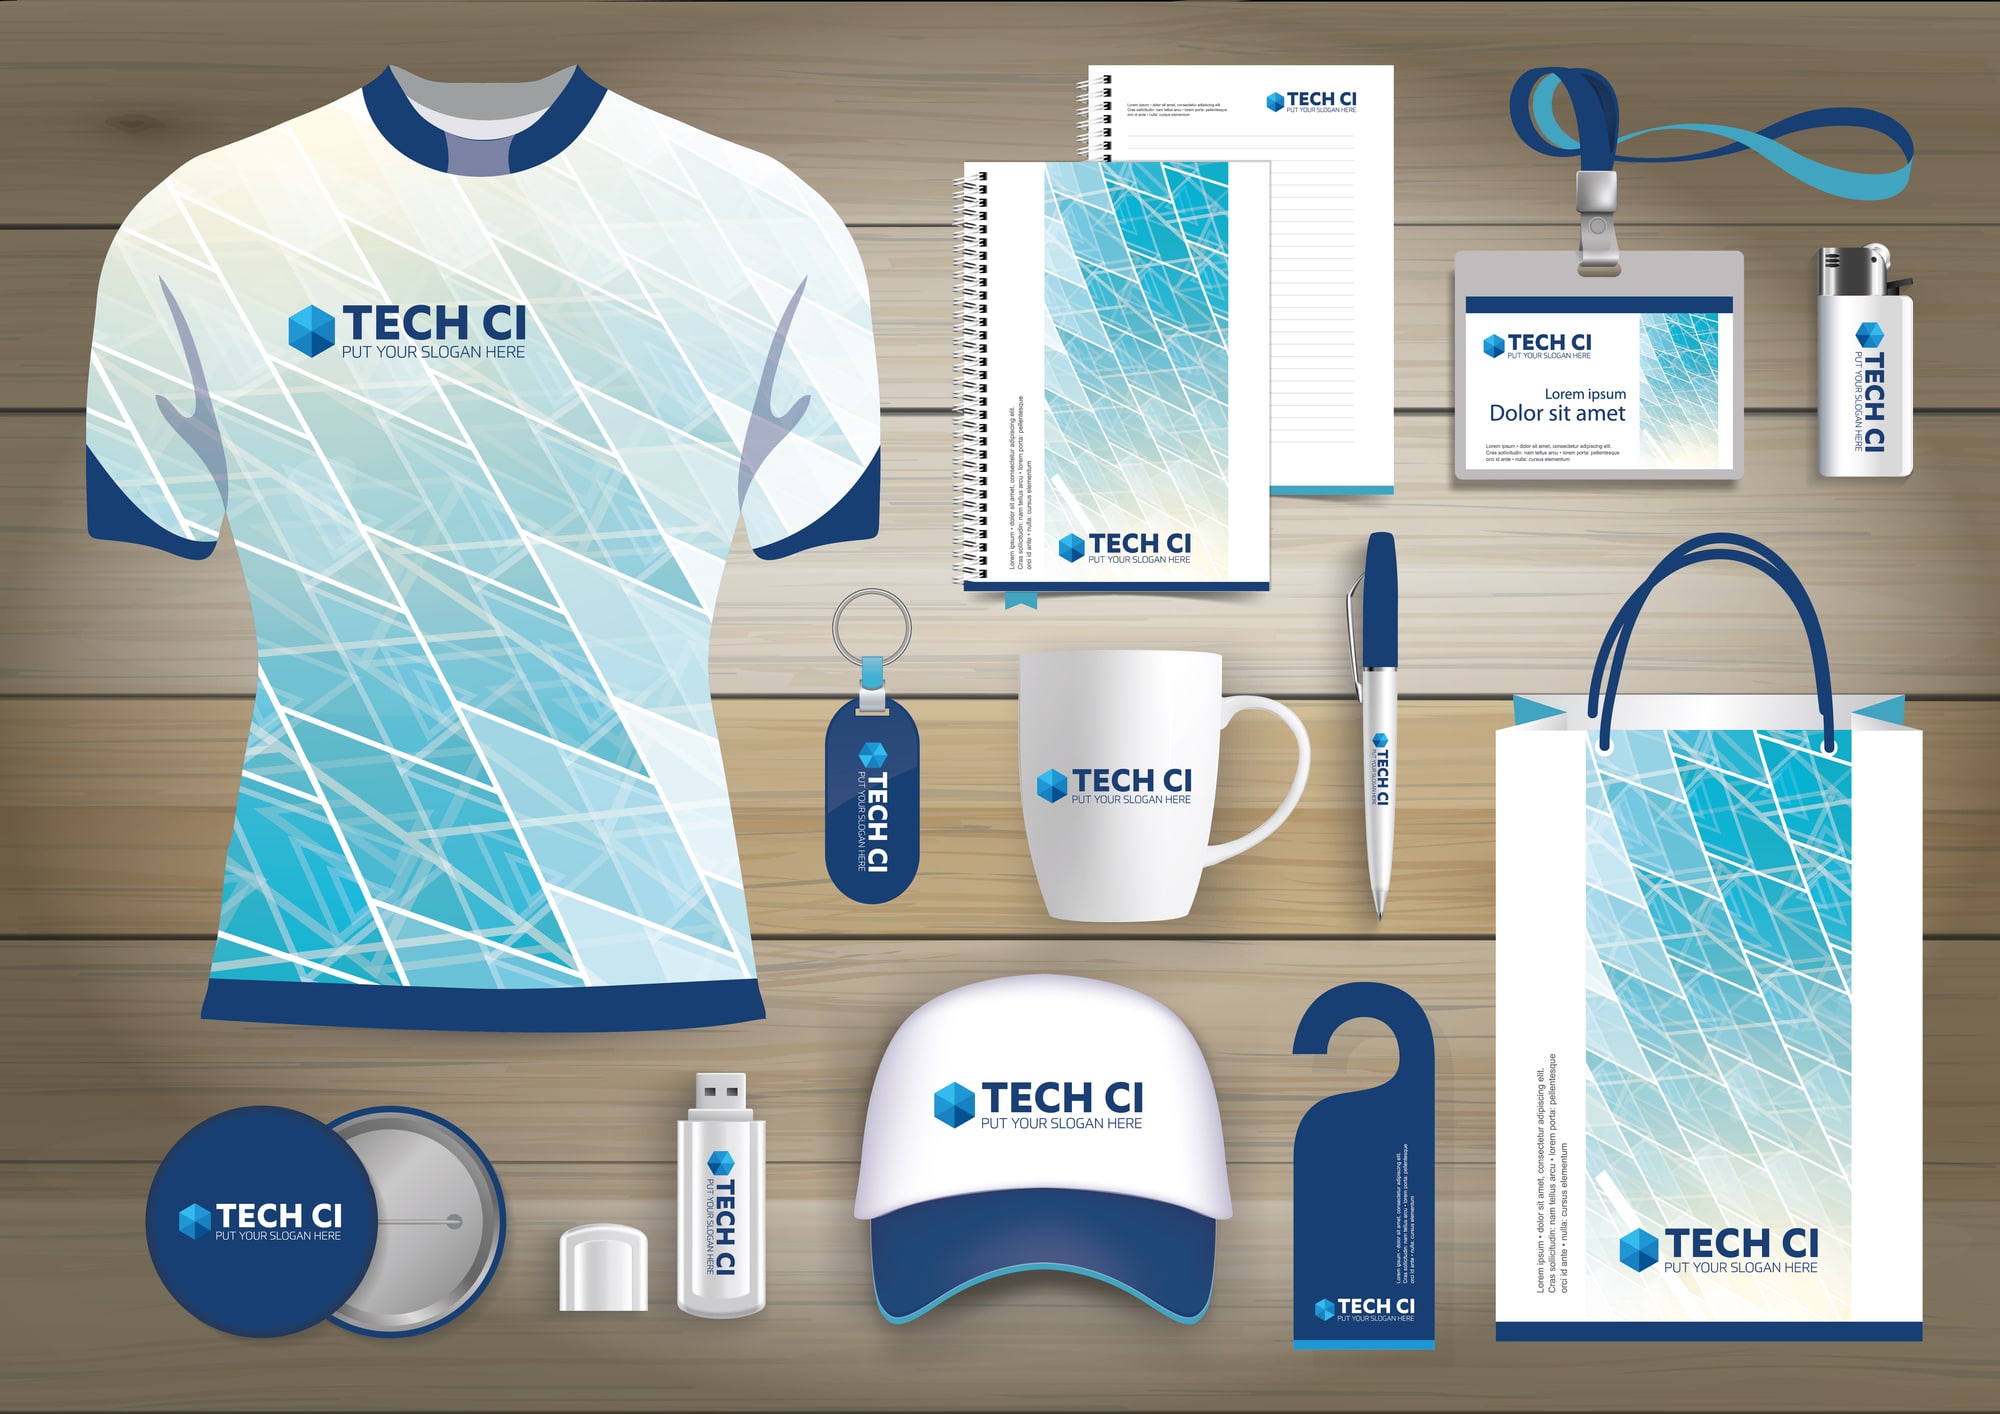 Print promotional items